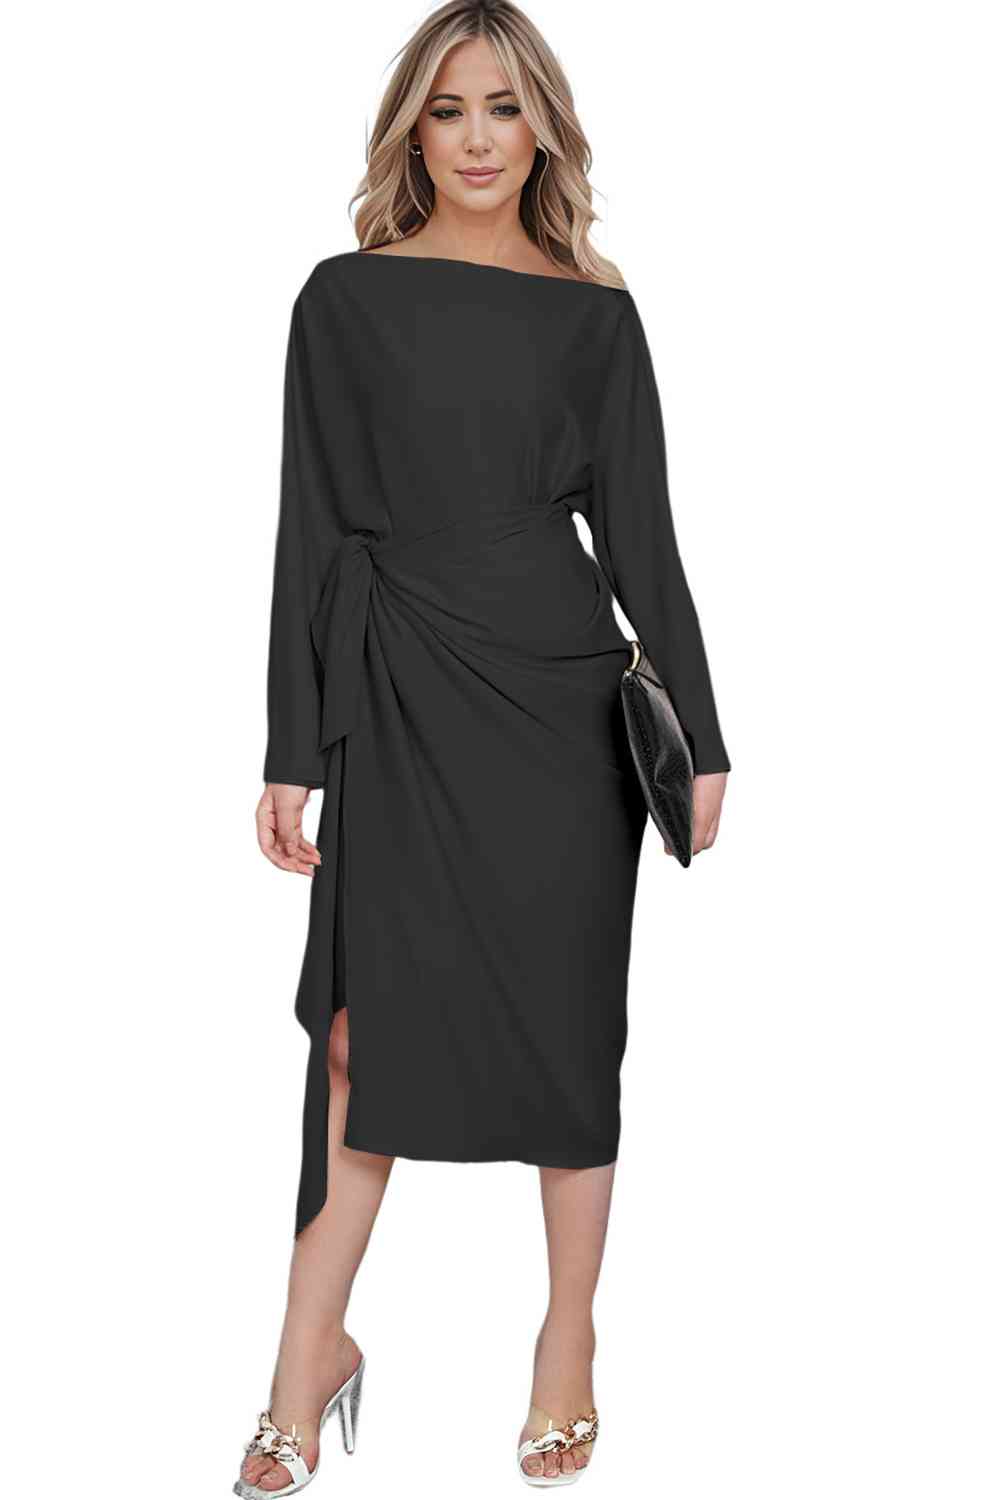 Evening Classic Boat Neck Wrap Dress Choice of Colors